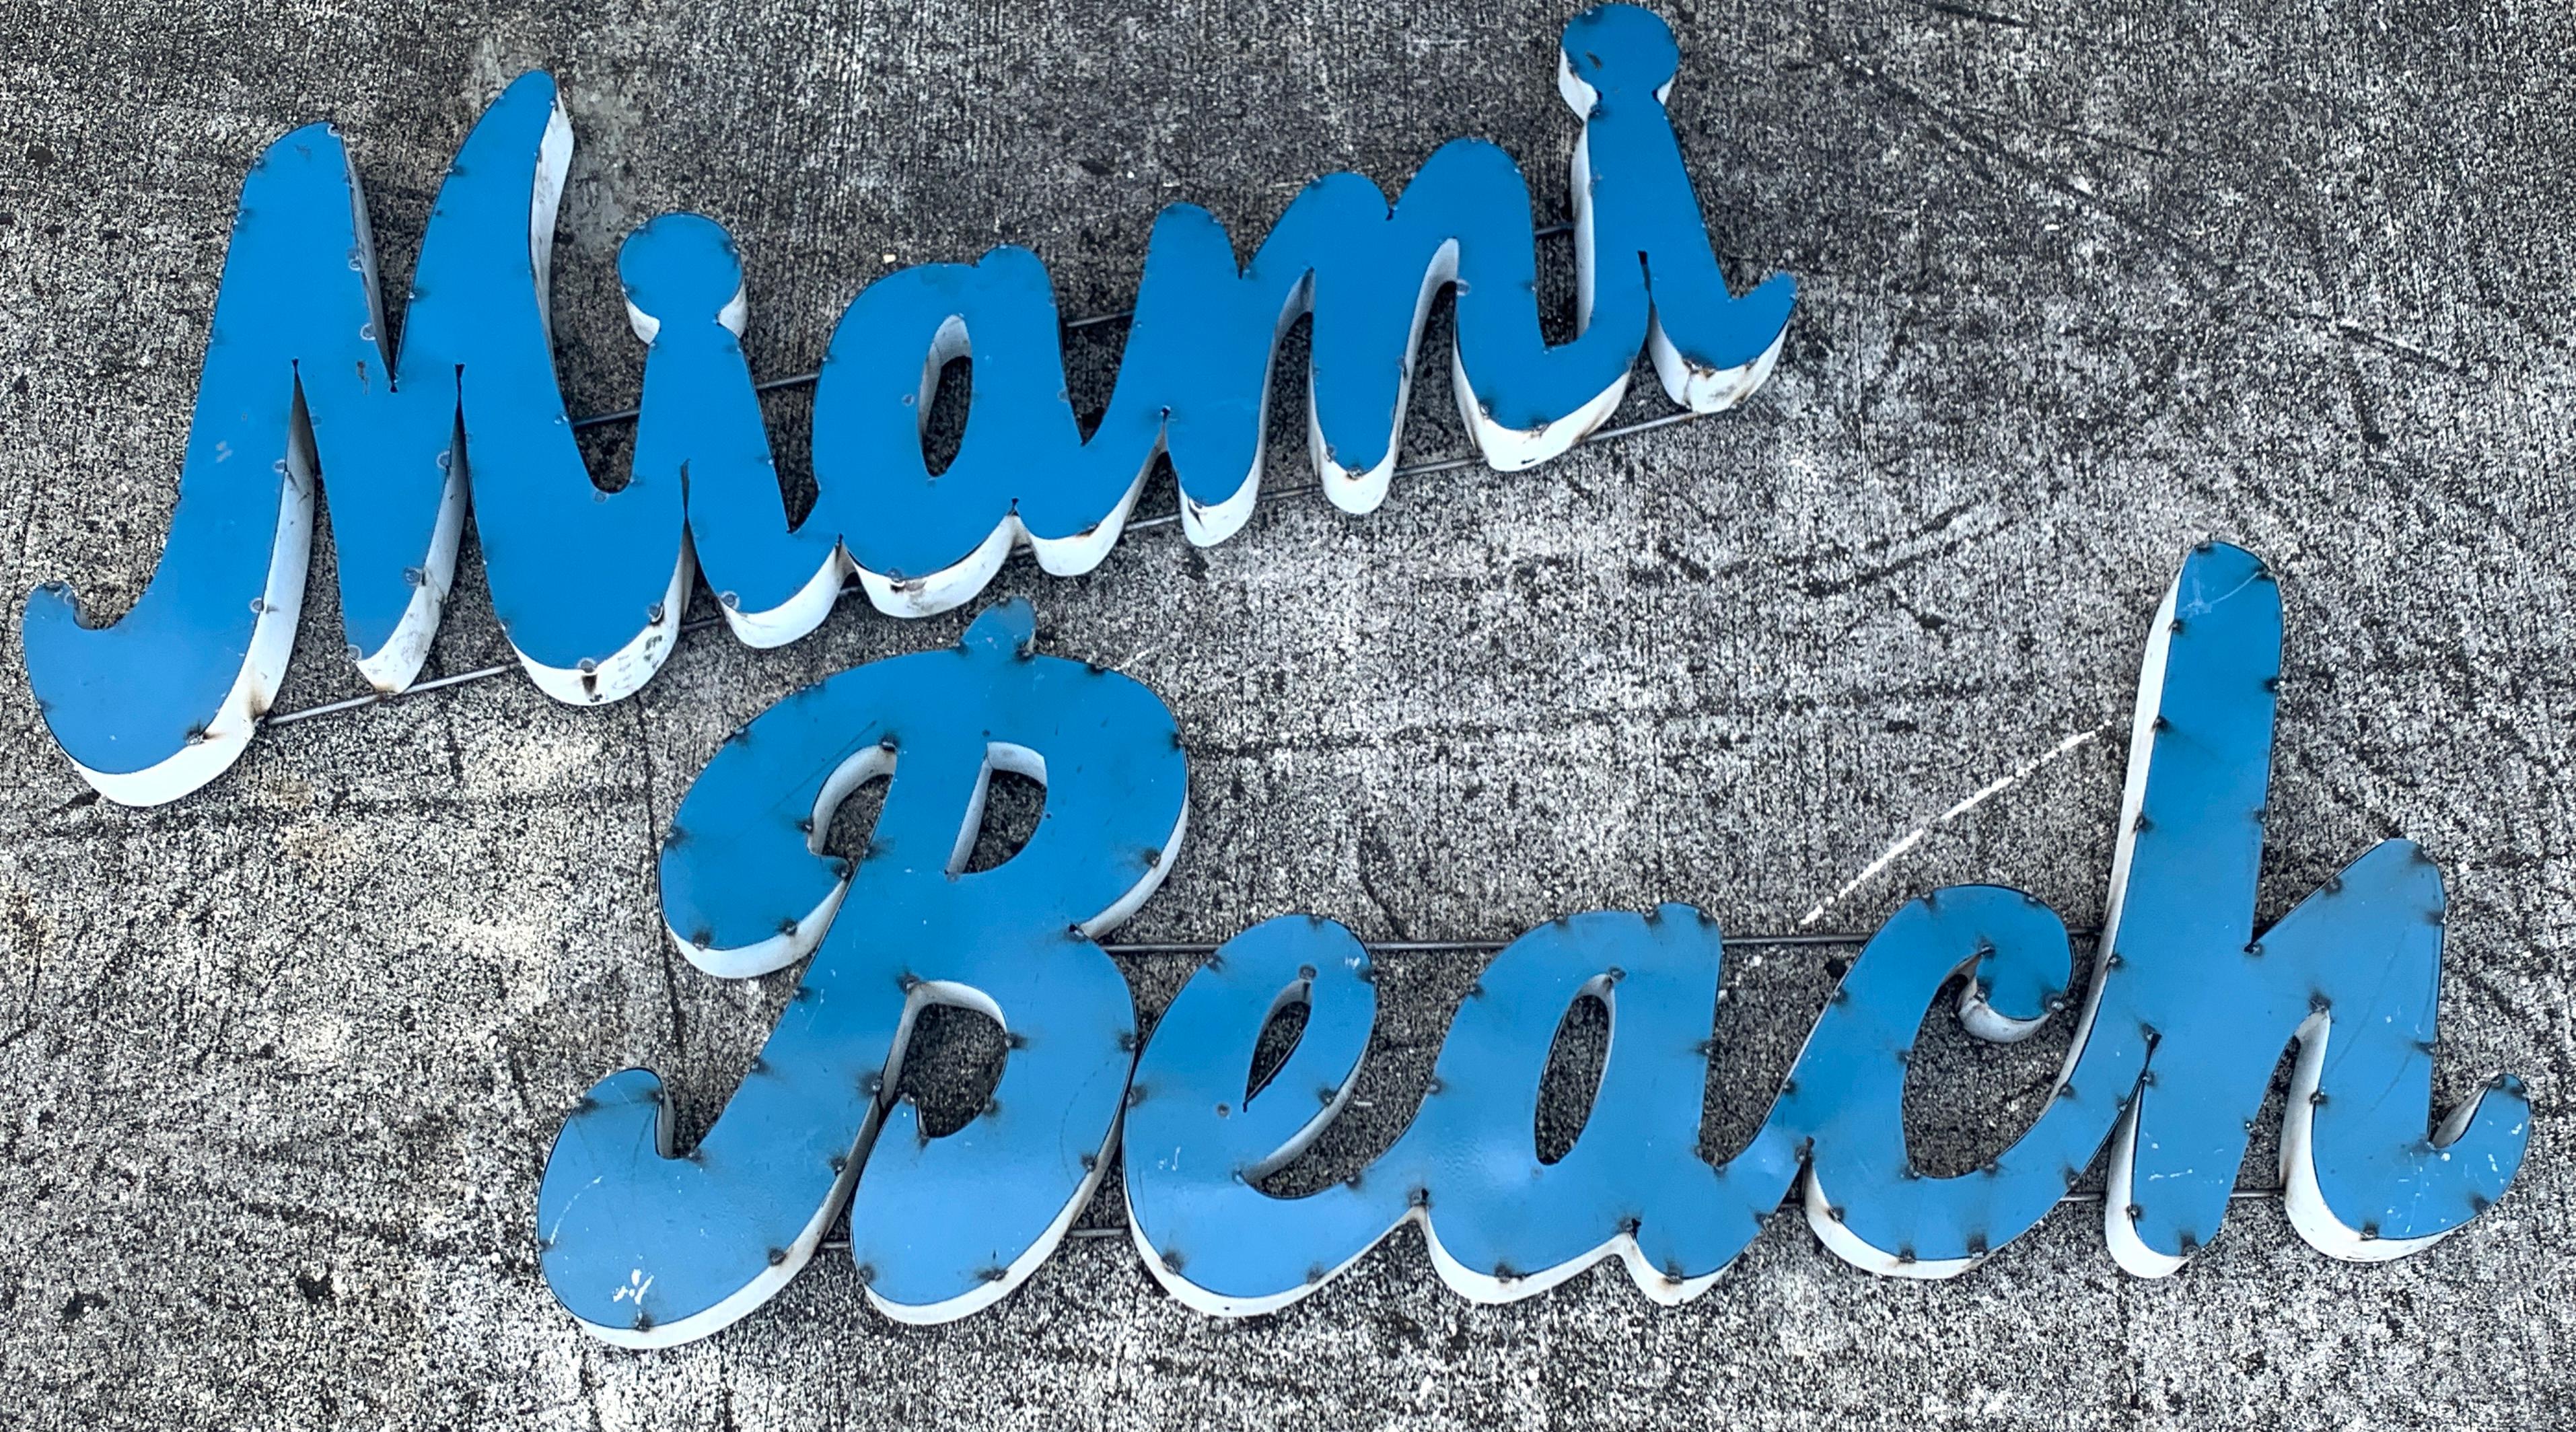 Large vintage 'Miami Beach' enameled metal sign, in two parts
Measures: Miami 47